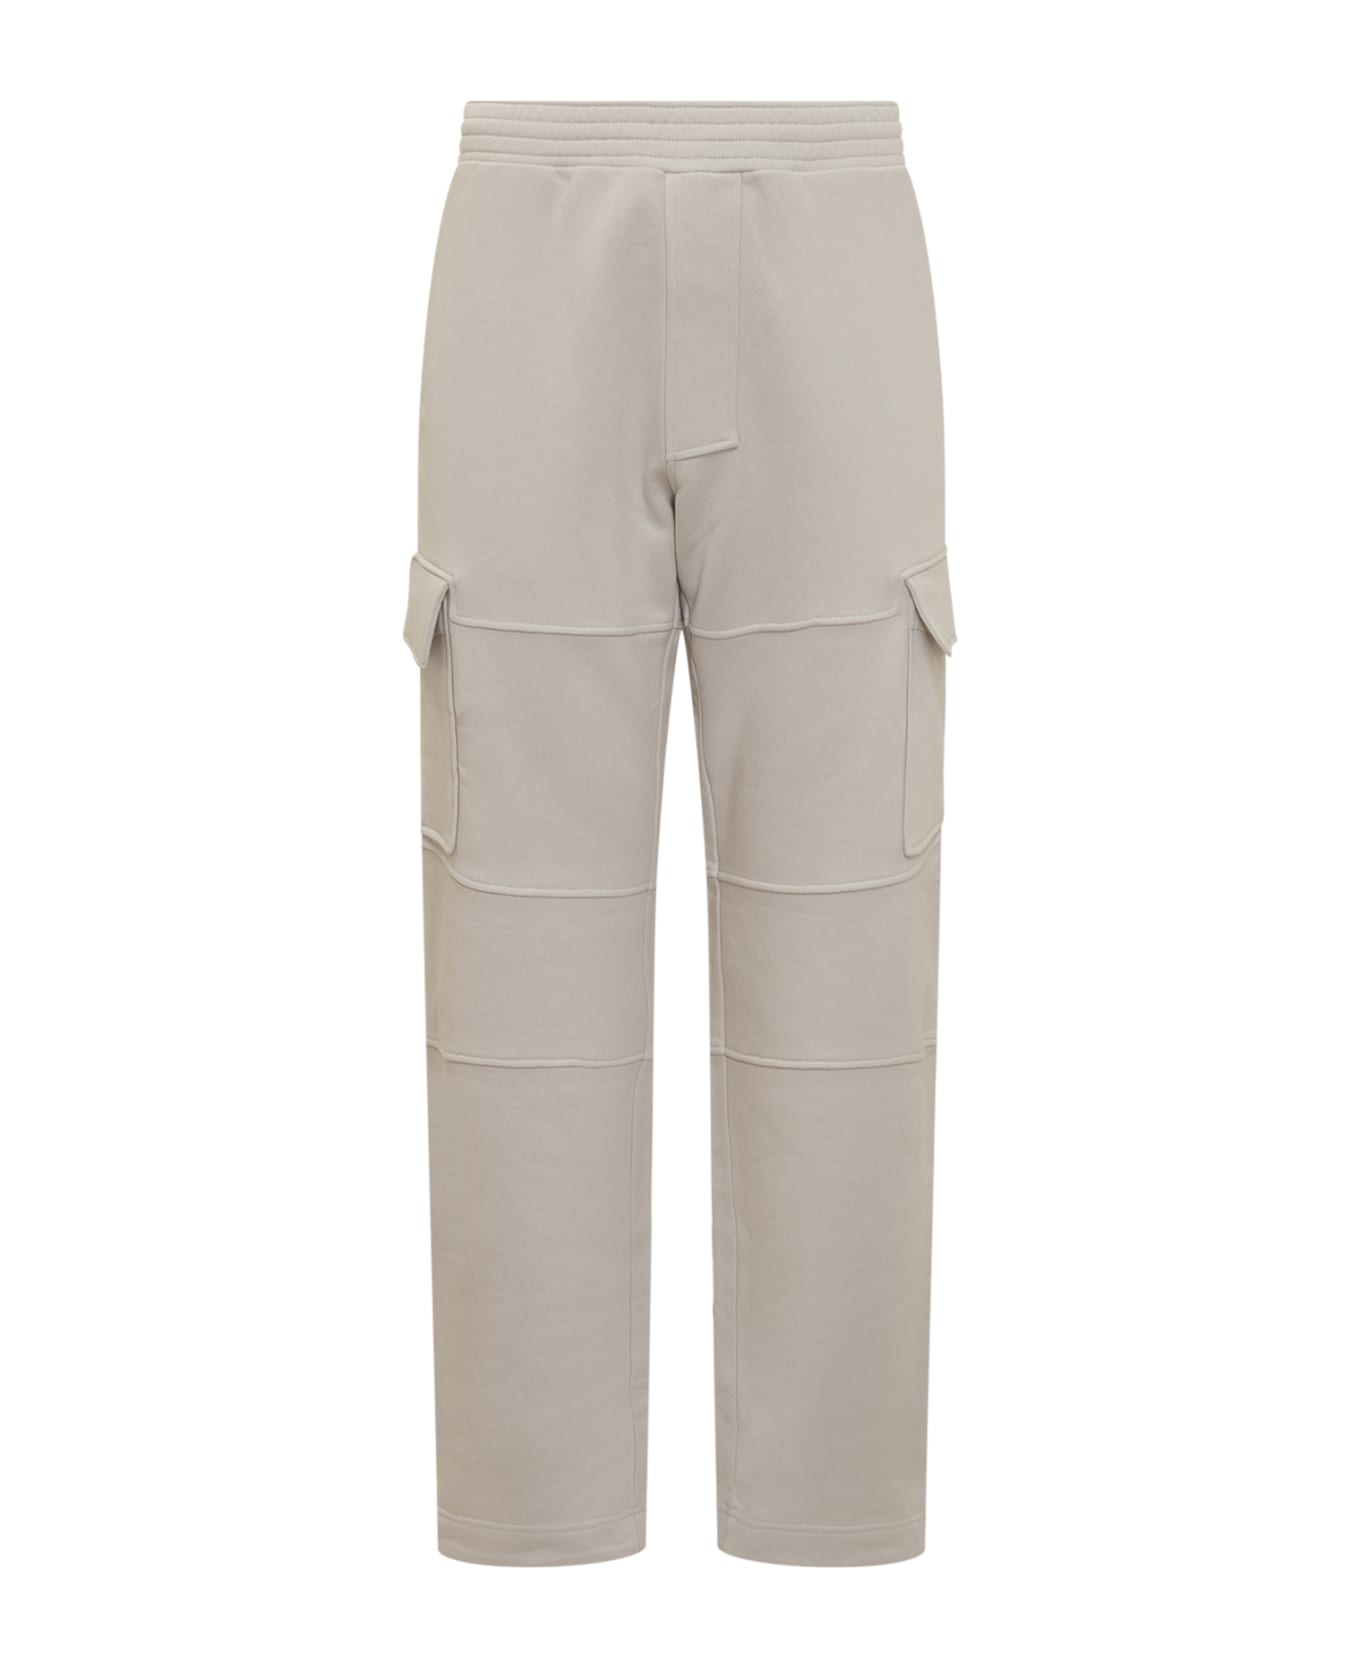 Givenchy Cotton Cargo Pants - CHALK ボトムス